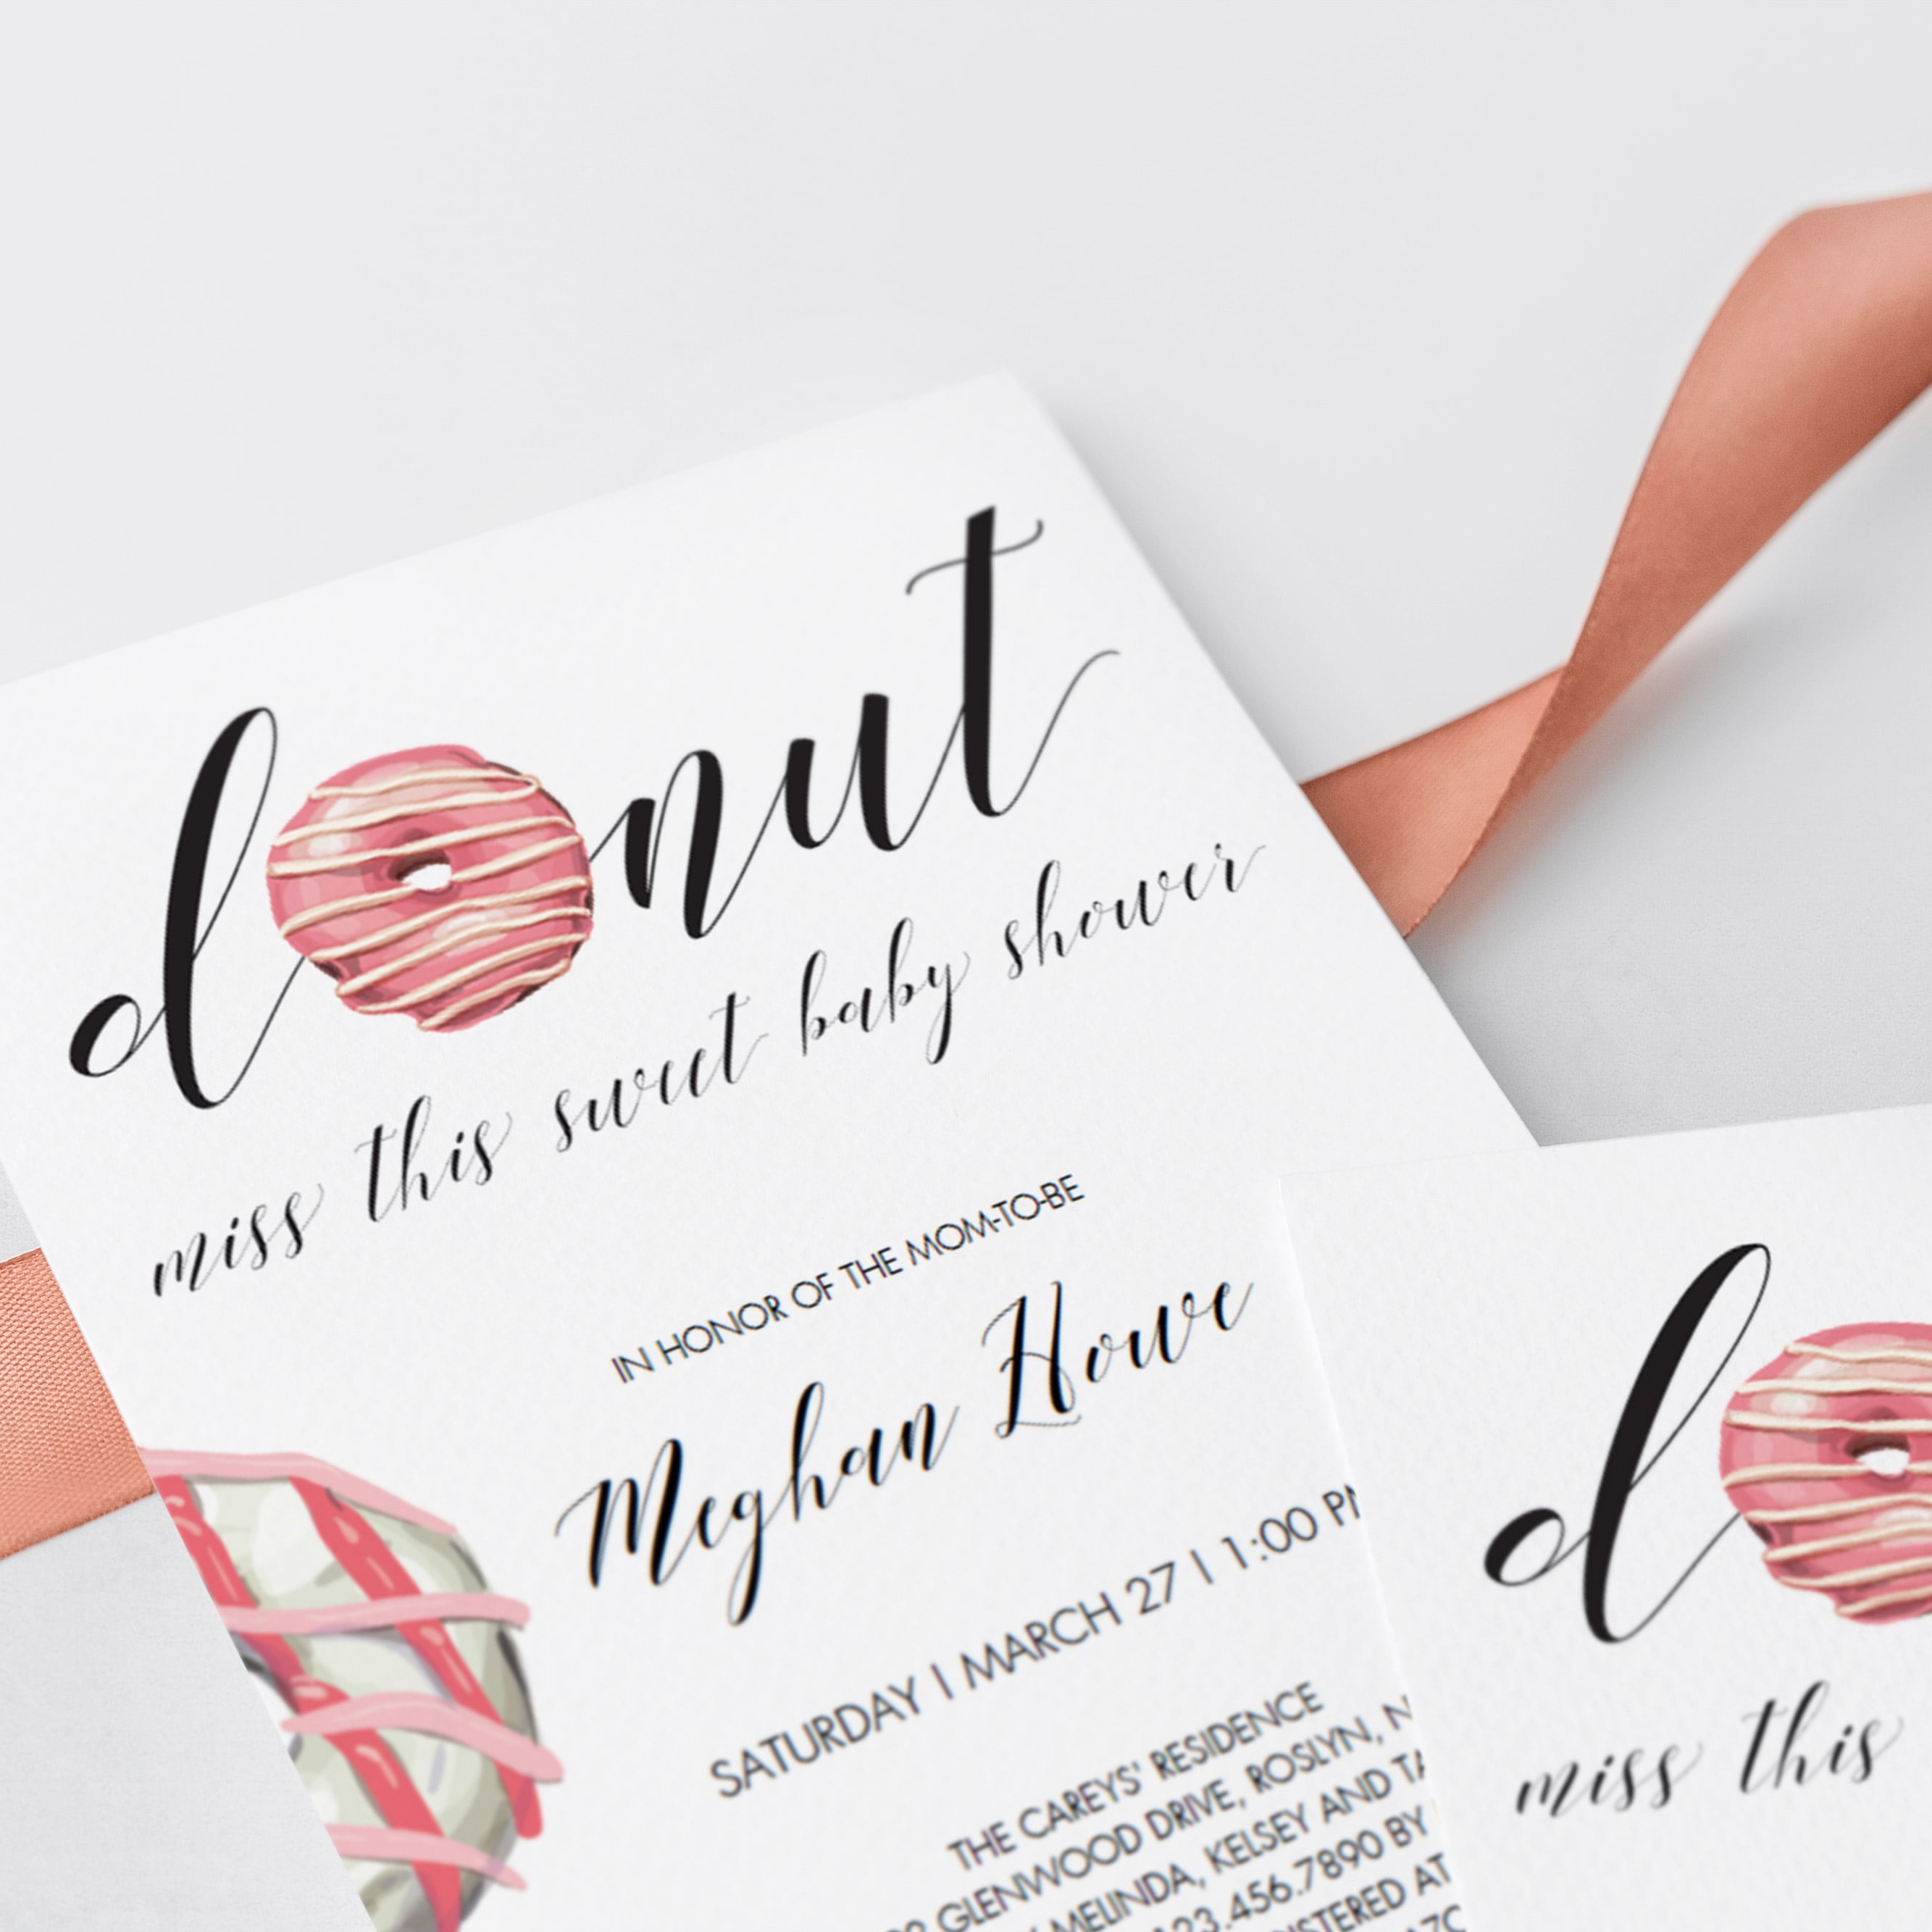 Donut party invitations by LittleSizzle